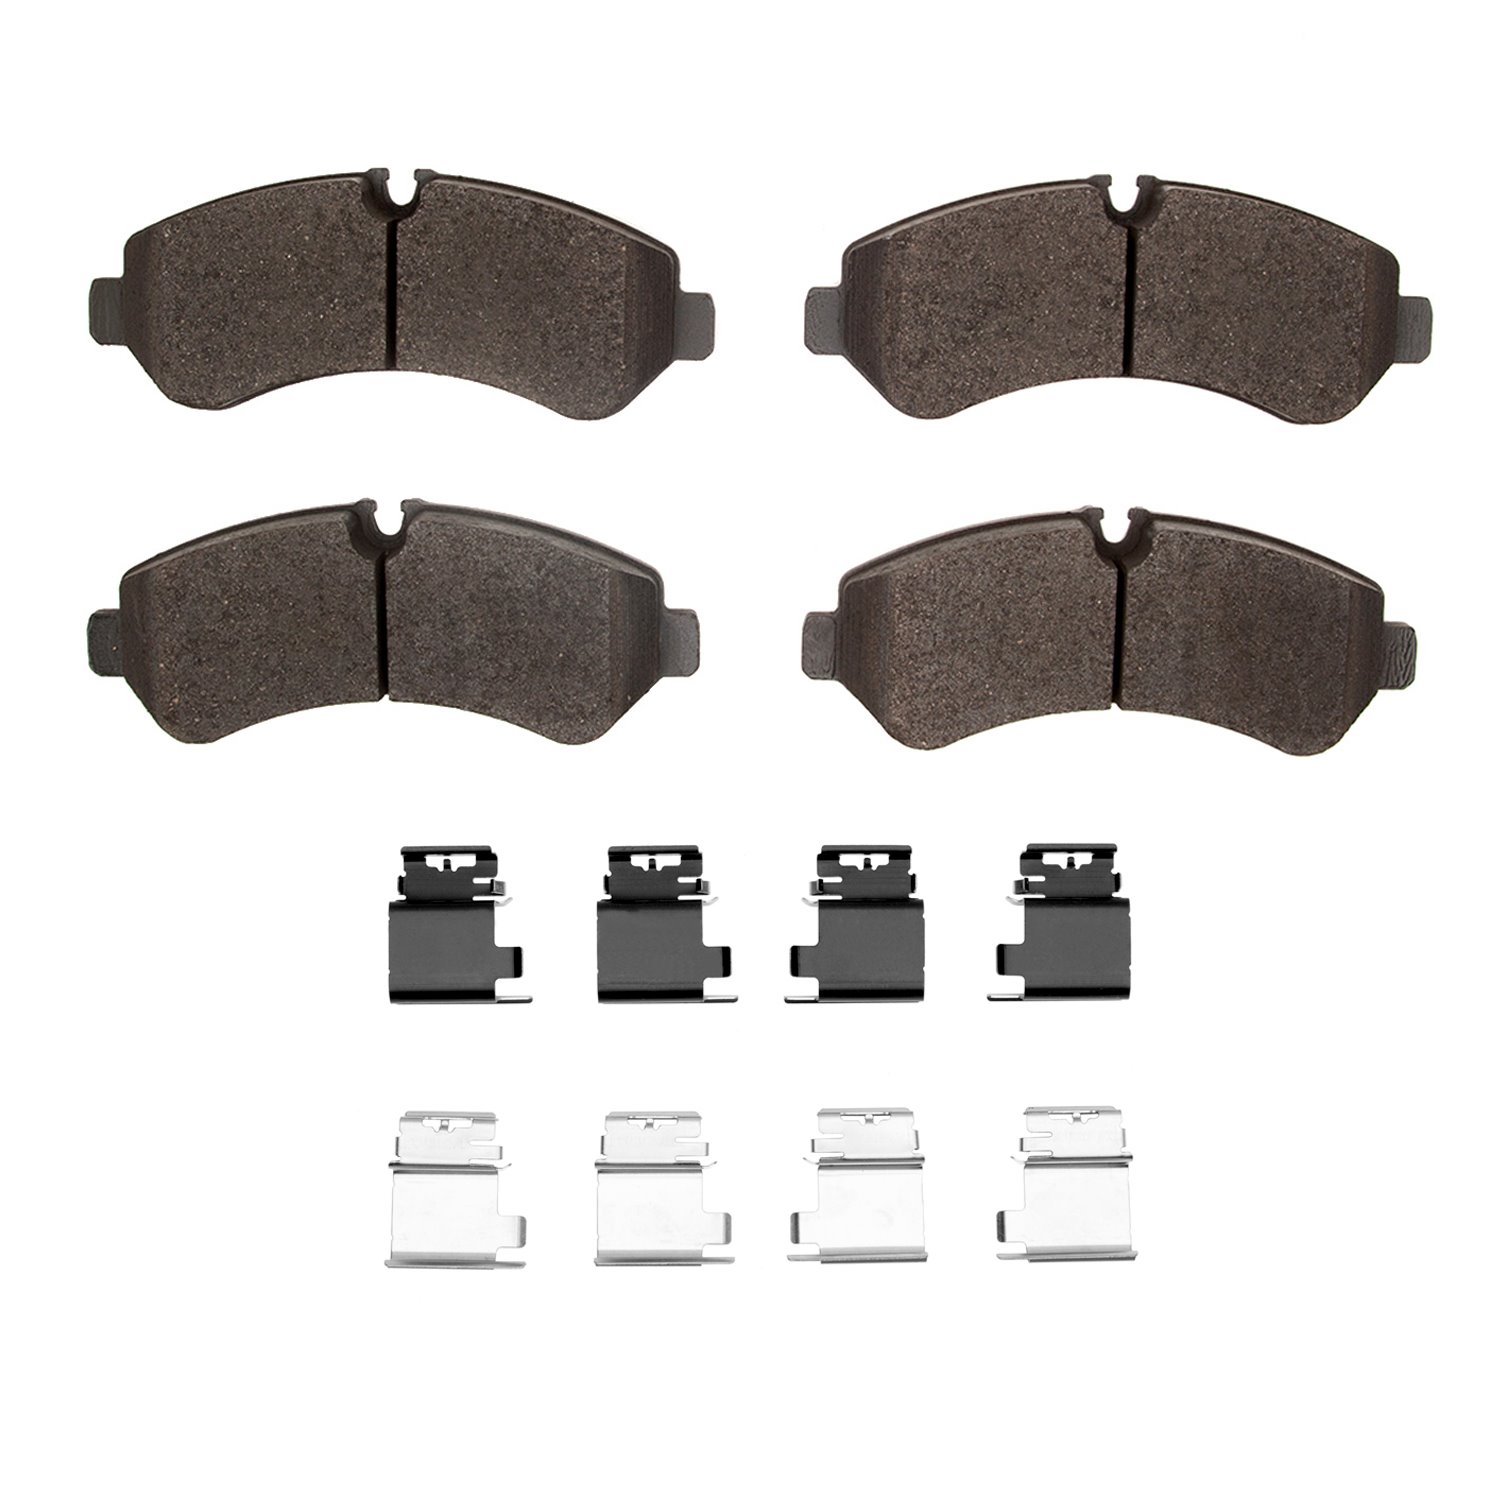 Super-Duty Brake Pads & Hardware Kit, Fits Select Fits Multiple Makes/Models, Position: Rear Right